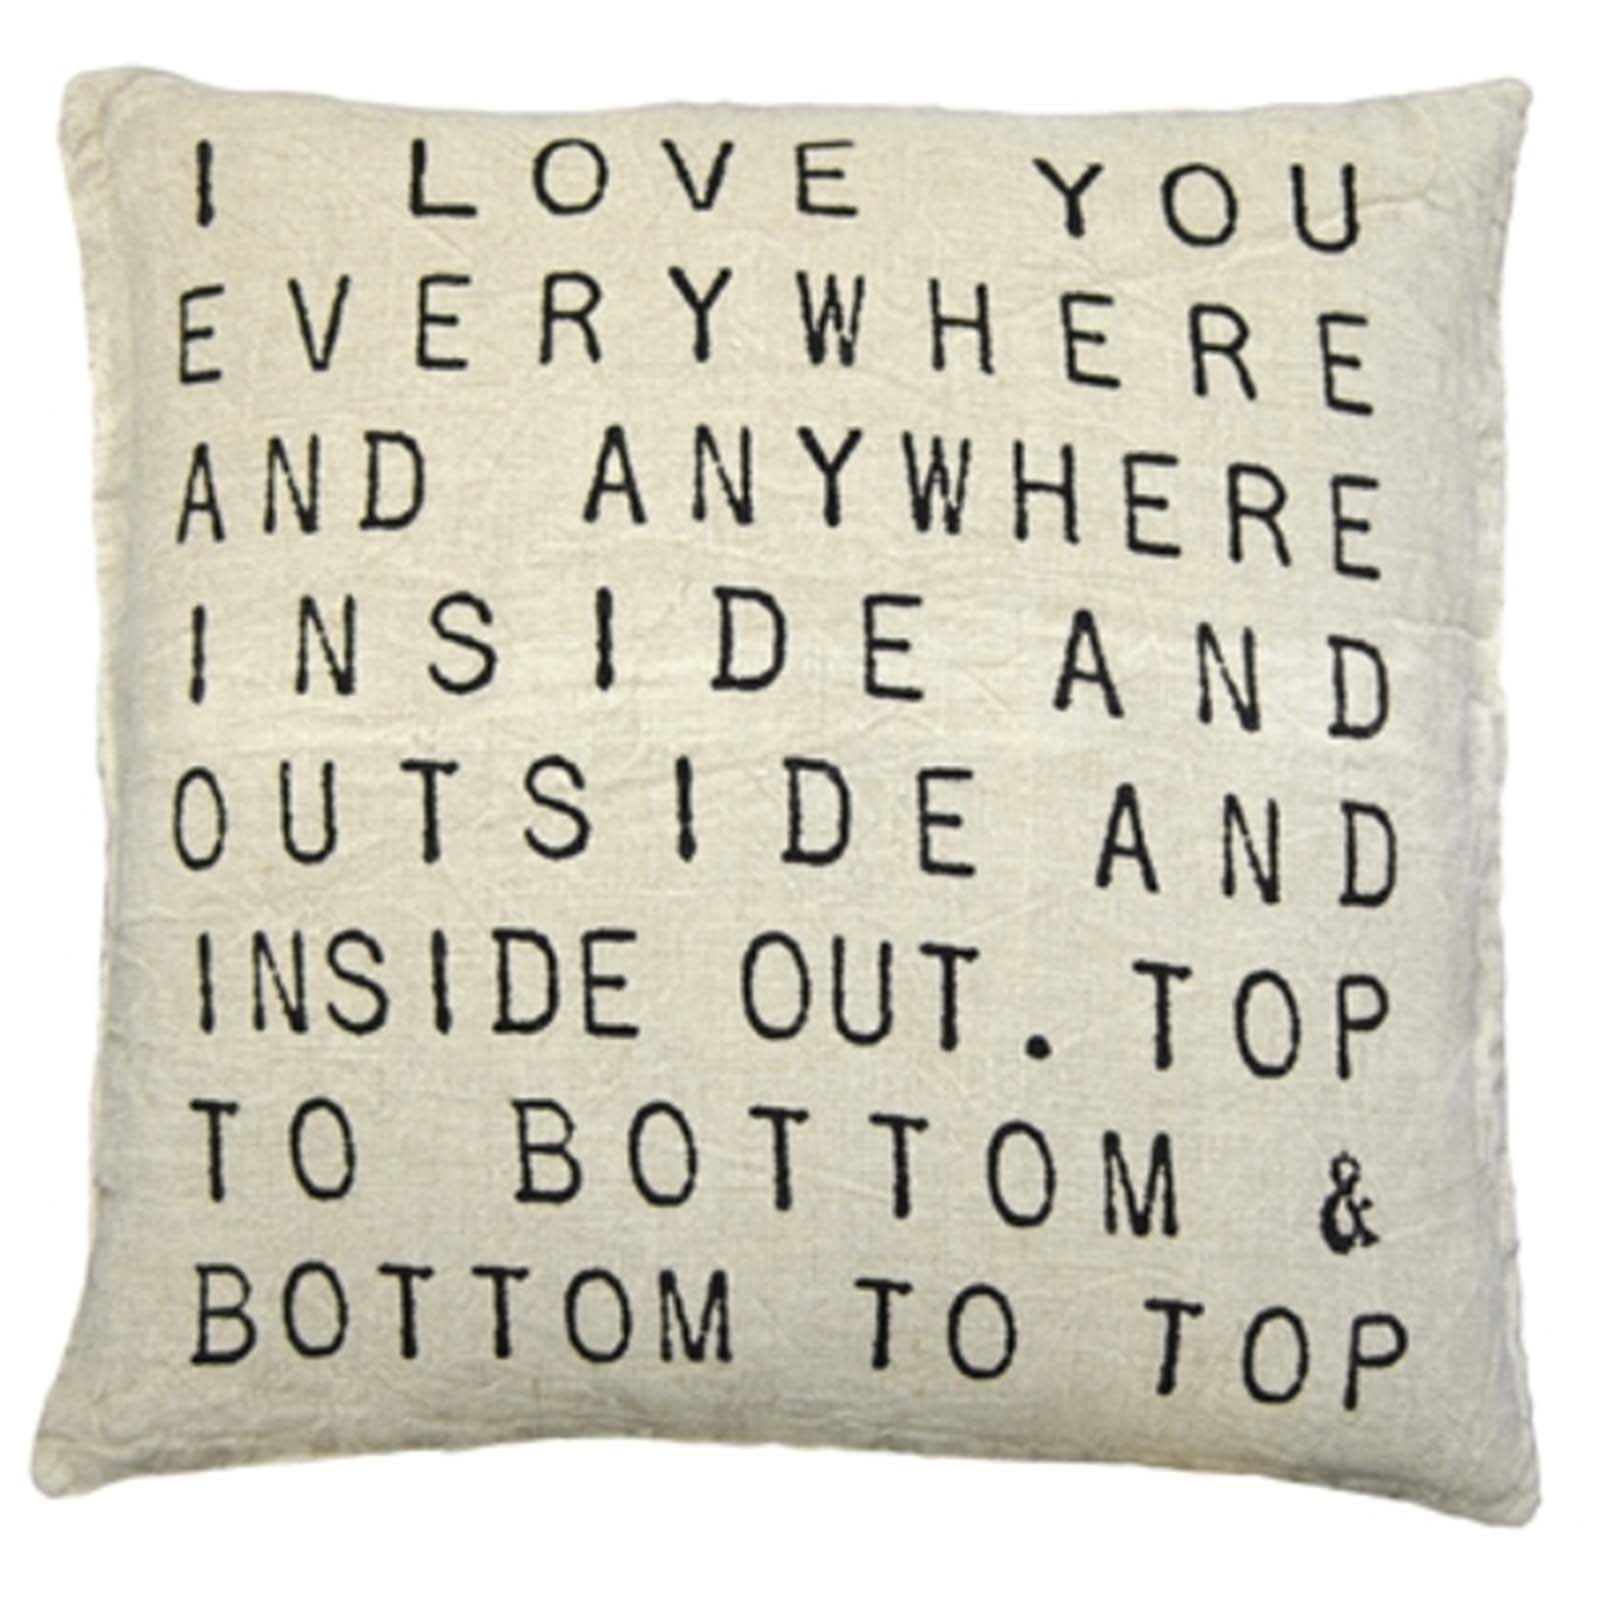 "I Love You" Pillow